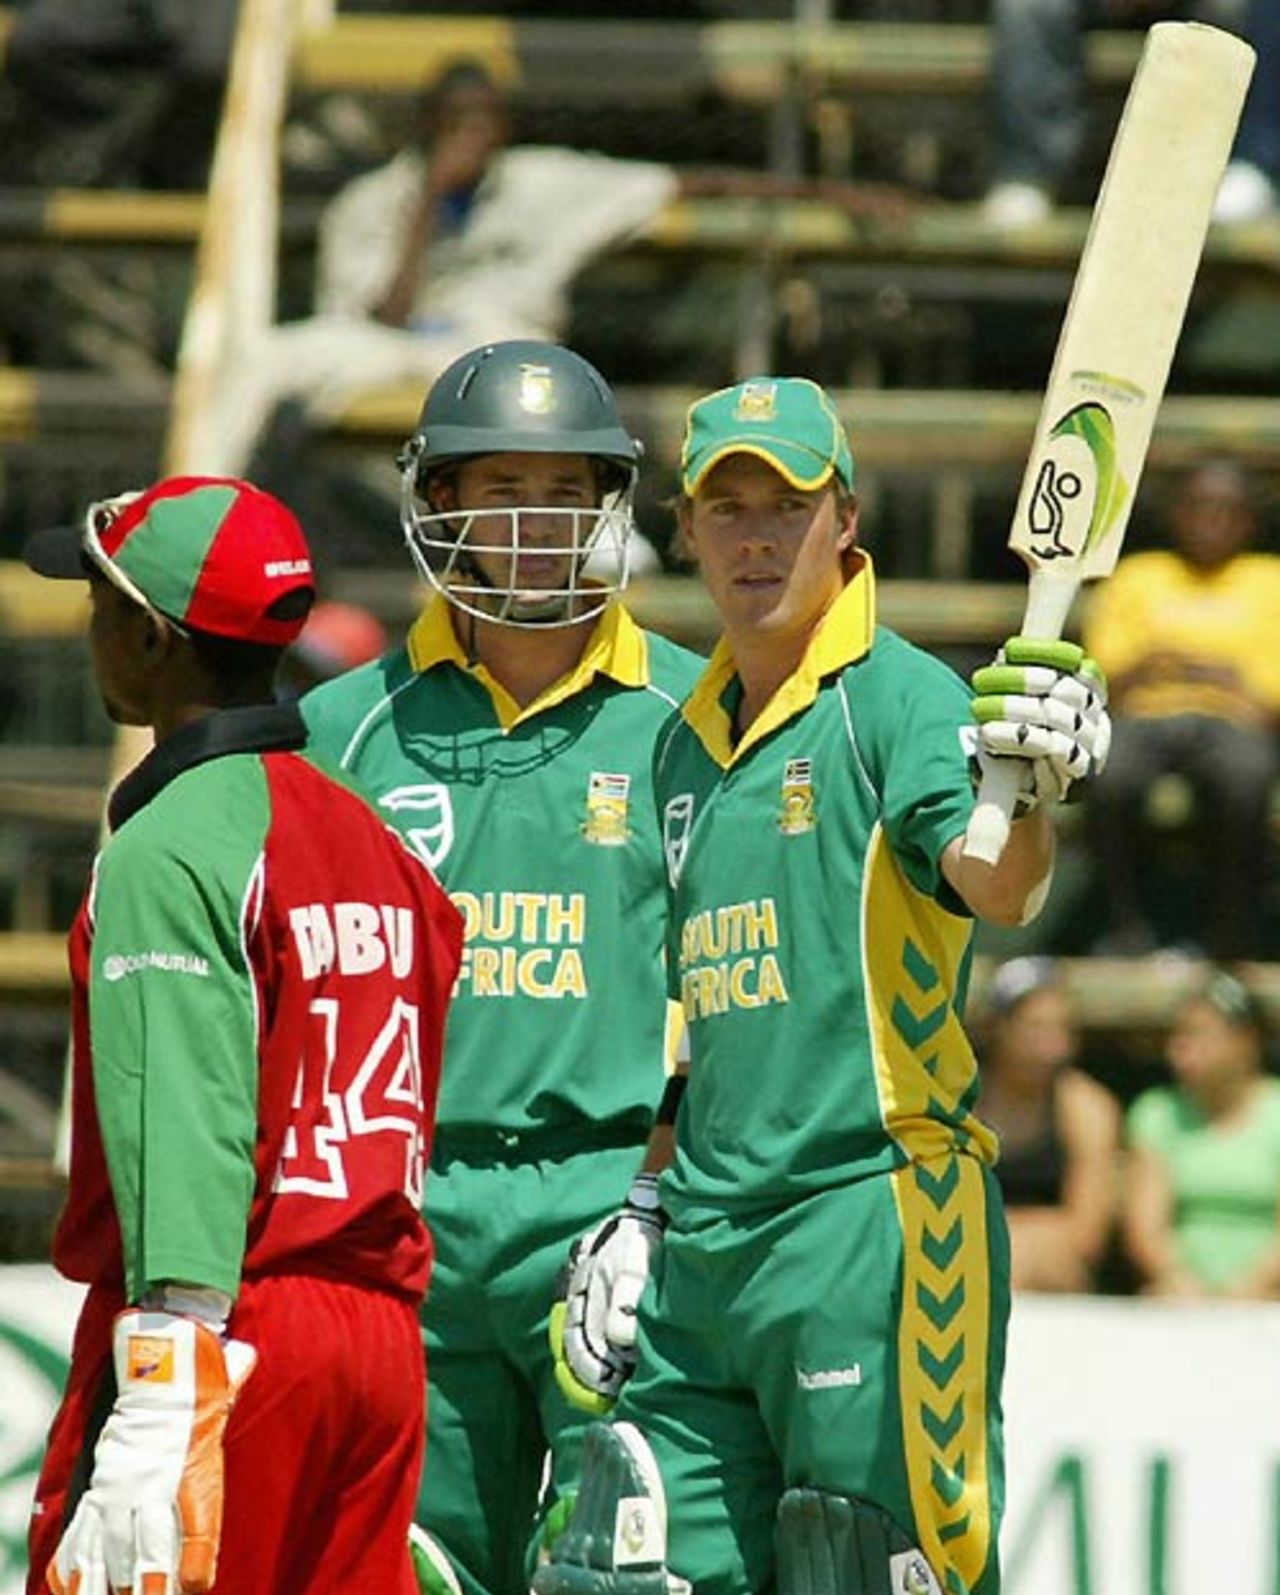 AB de Villiers acknowledges the cheers after reaching his half-century, Zimbabwe v South Africa, 3rd ODI, Harare, August 26, 2007